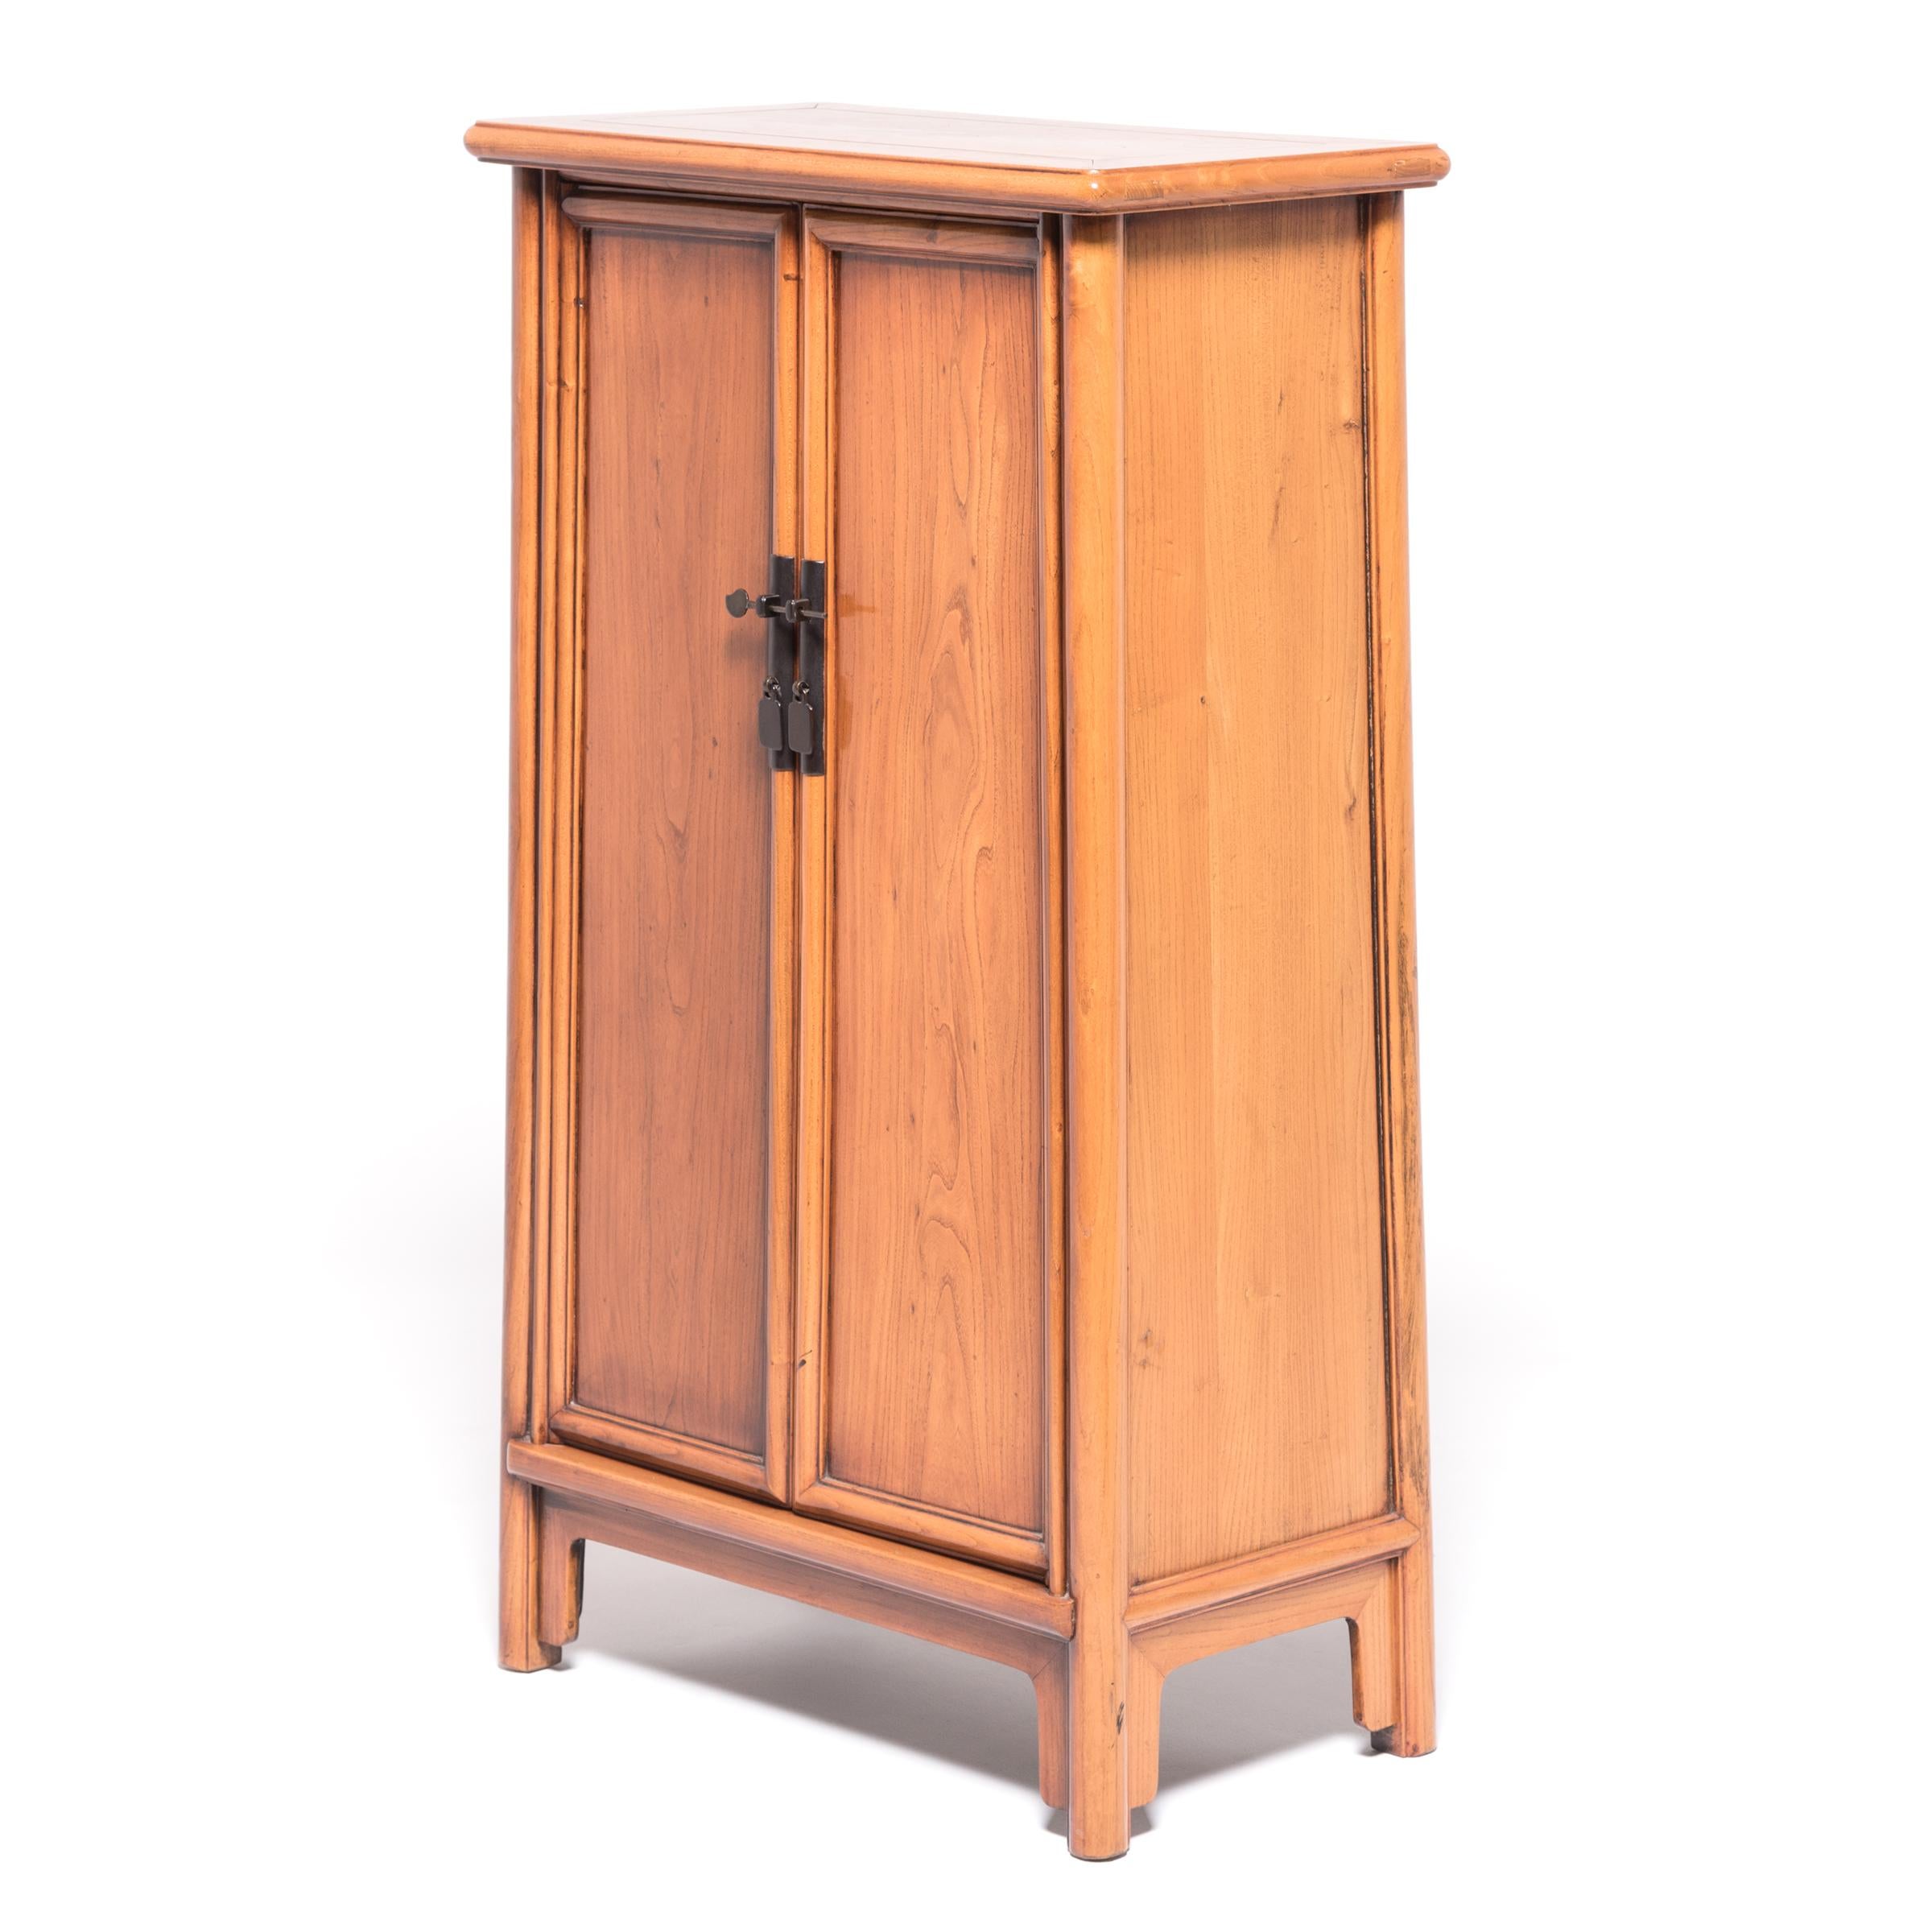 A Classic piece of Chinese furniture, this 19th century elmwood cabinet embodies the simple and subtle elegance of Ming furniture. It probably once sat in a home in China’s Shanxi Province; its shelves filled with curios or embroidered silks. The